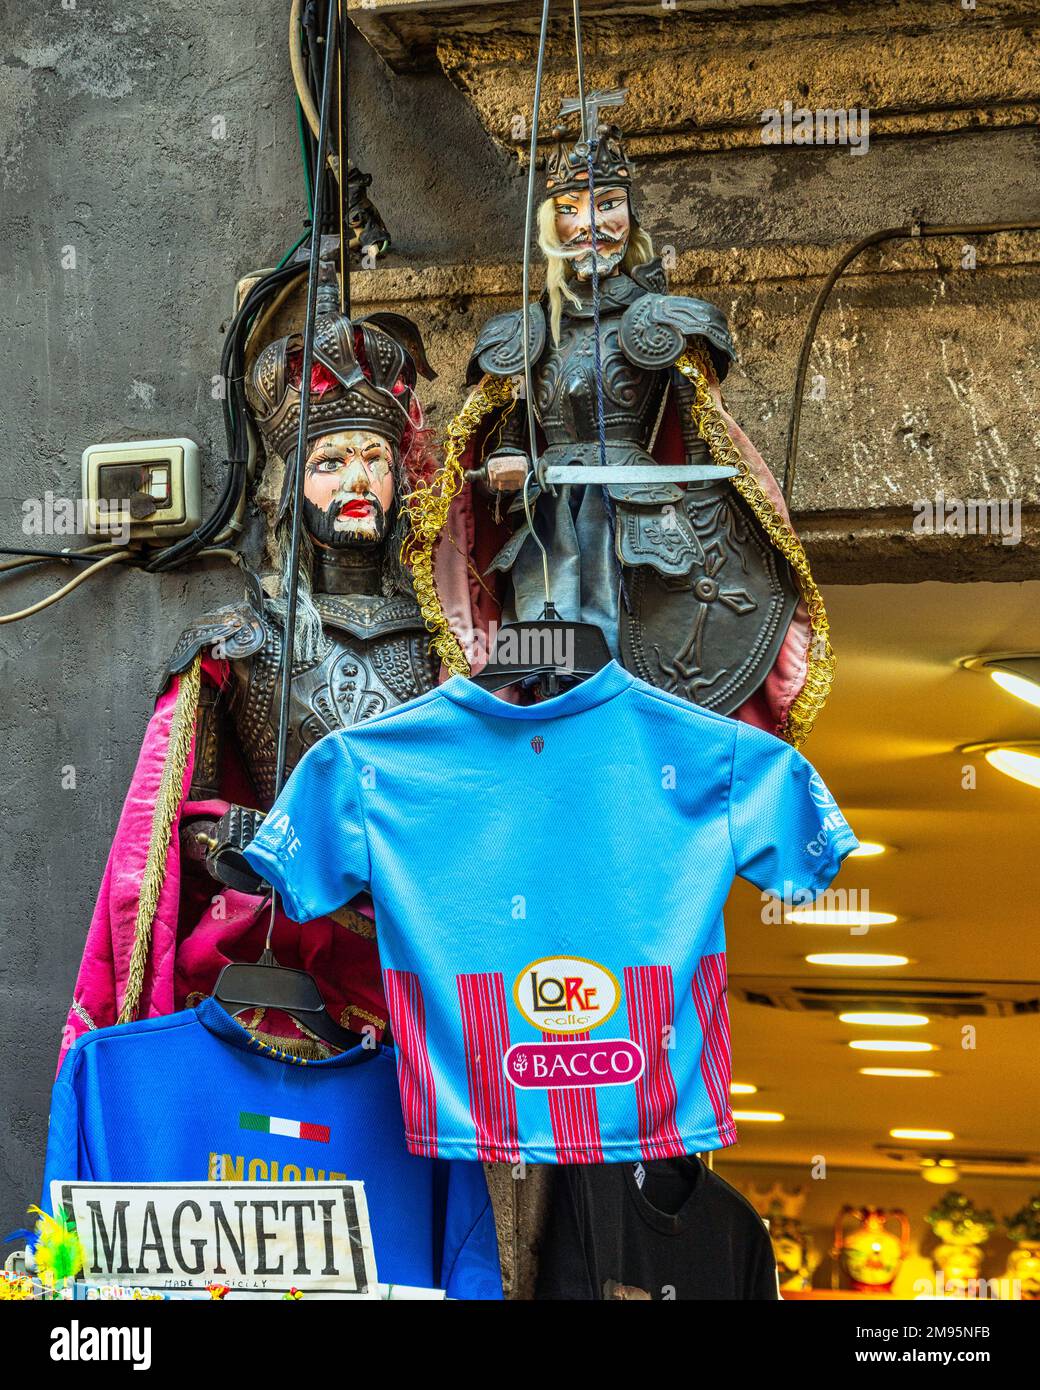 The Sicilian puppets, the traditional Sicilian puppets on display for sale, and the shirts of famous players offered as souvenirs. Catania, Sicily Stock Photo